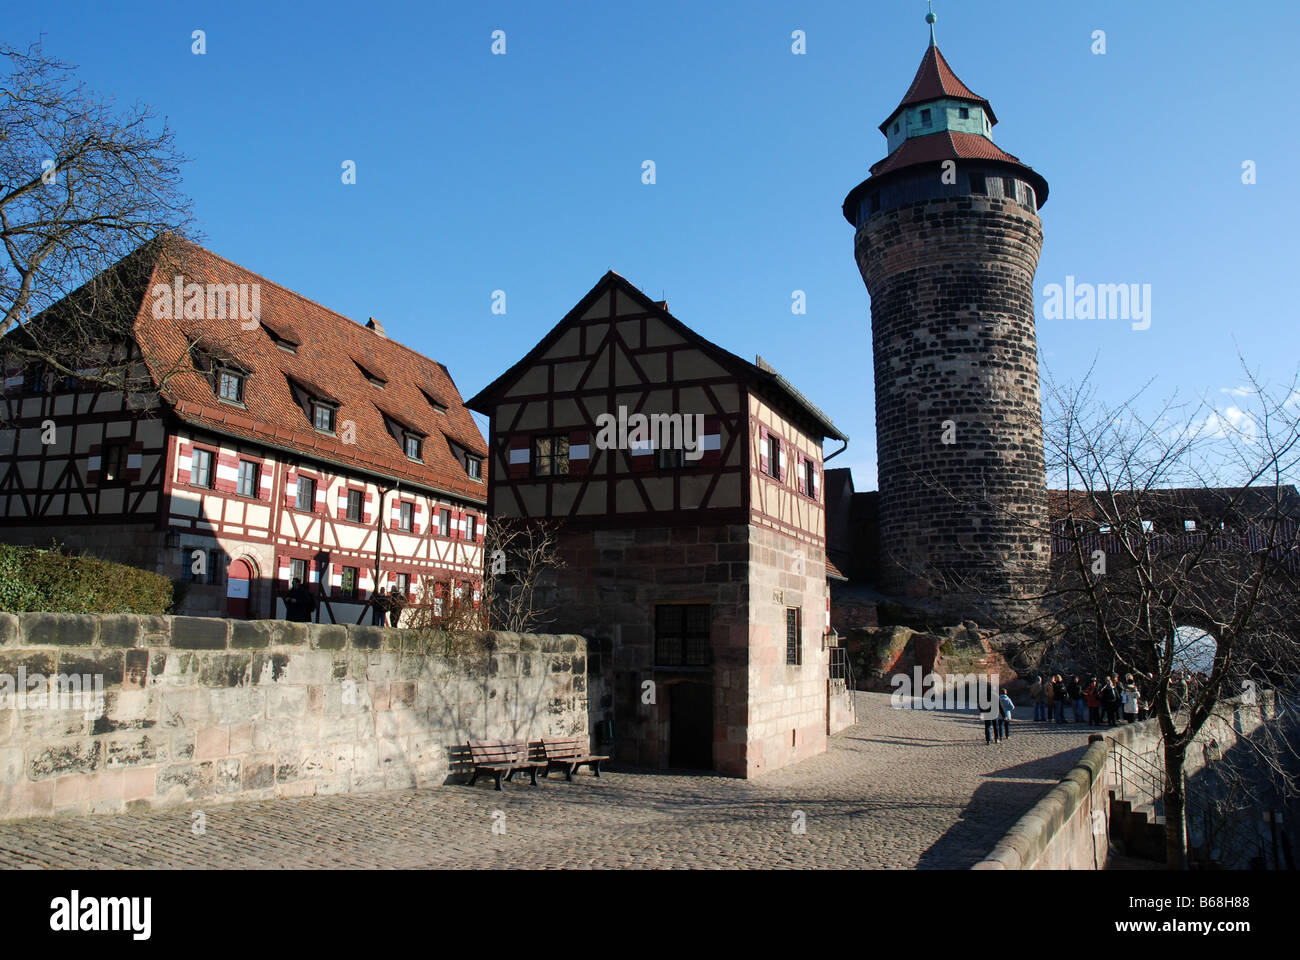 Imperial Palace of Nuremberg Germany Stock Photo